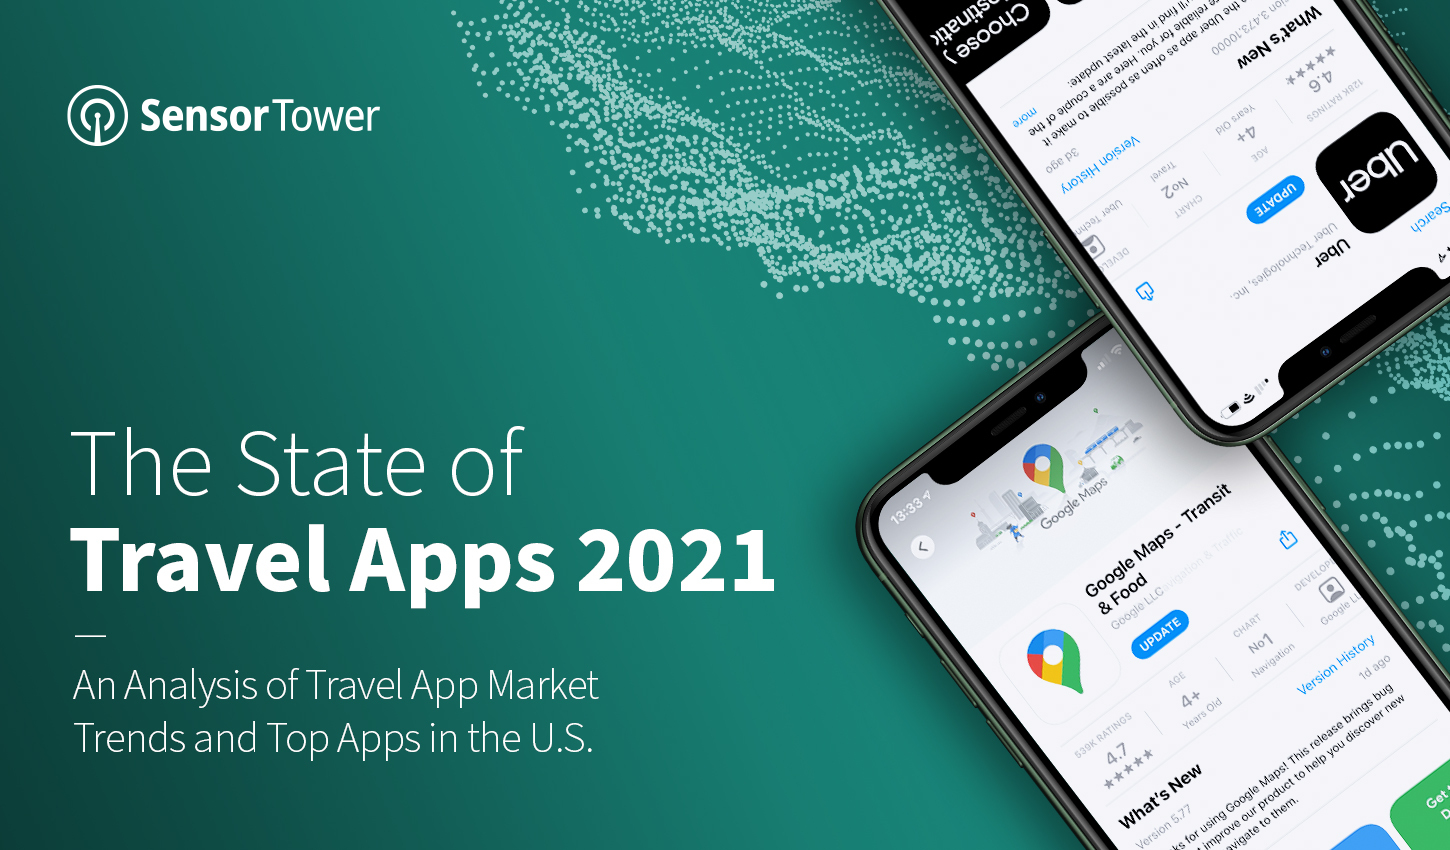 Takeaways from Sensor Tower's State of Travel Apps Report 2021